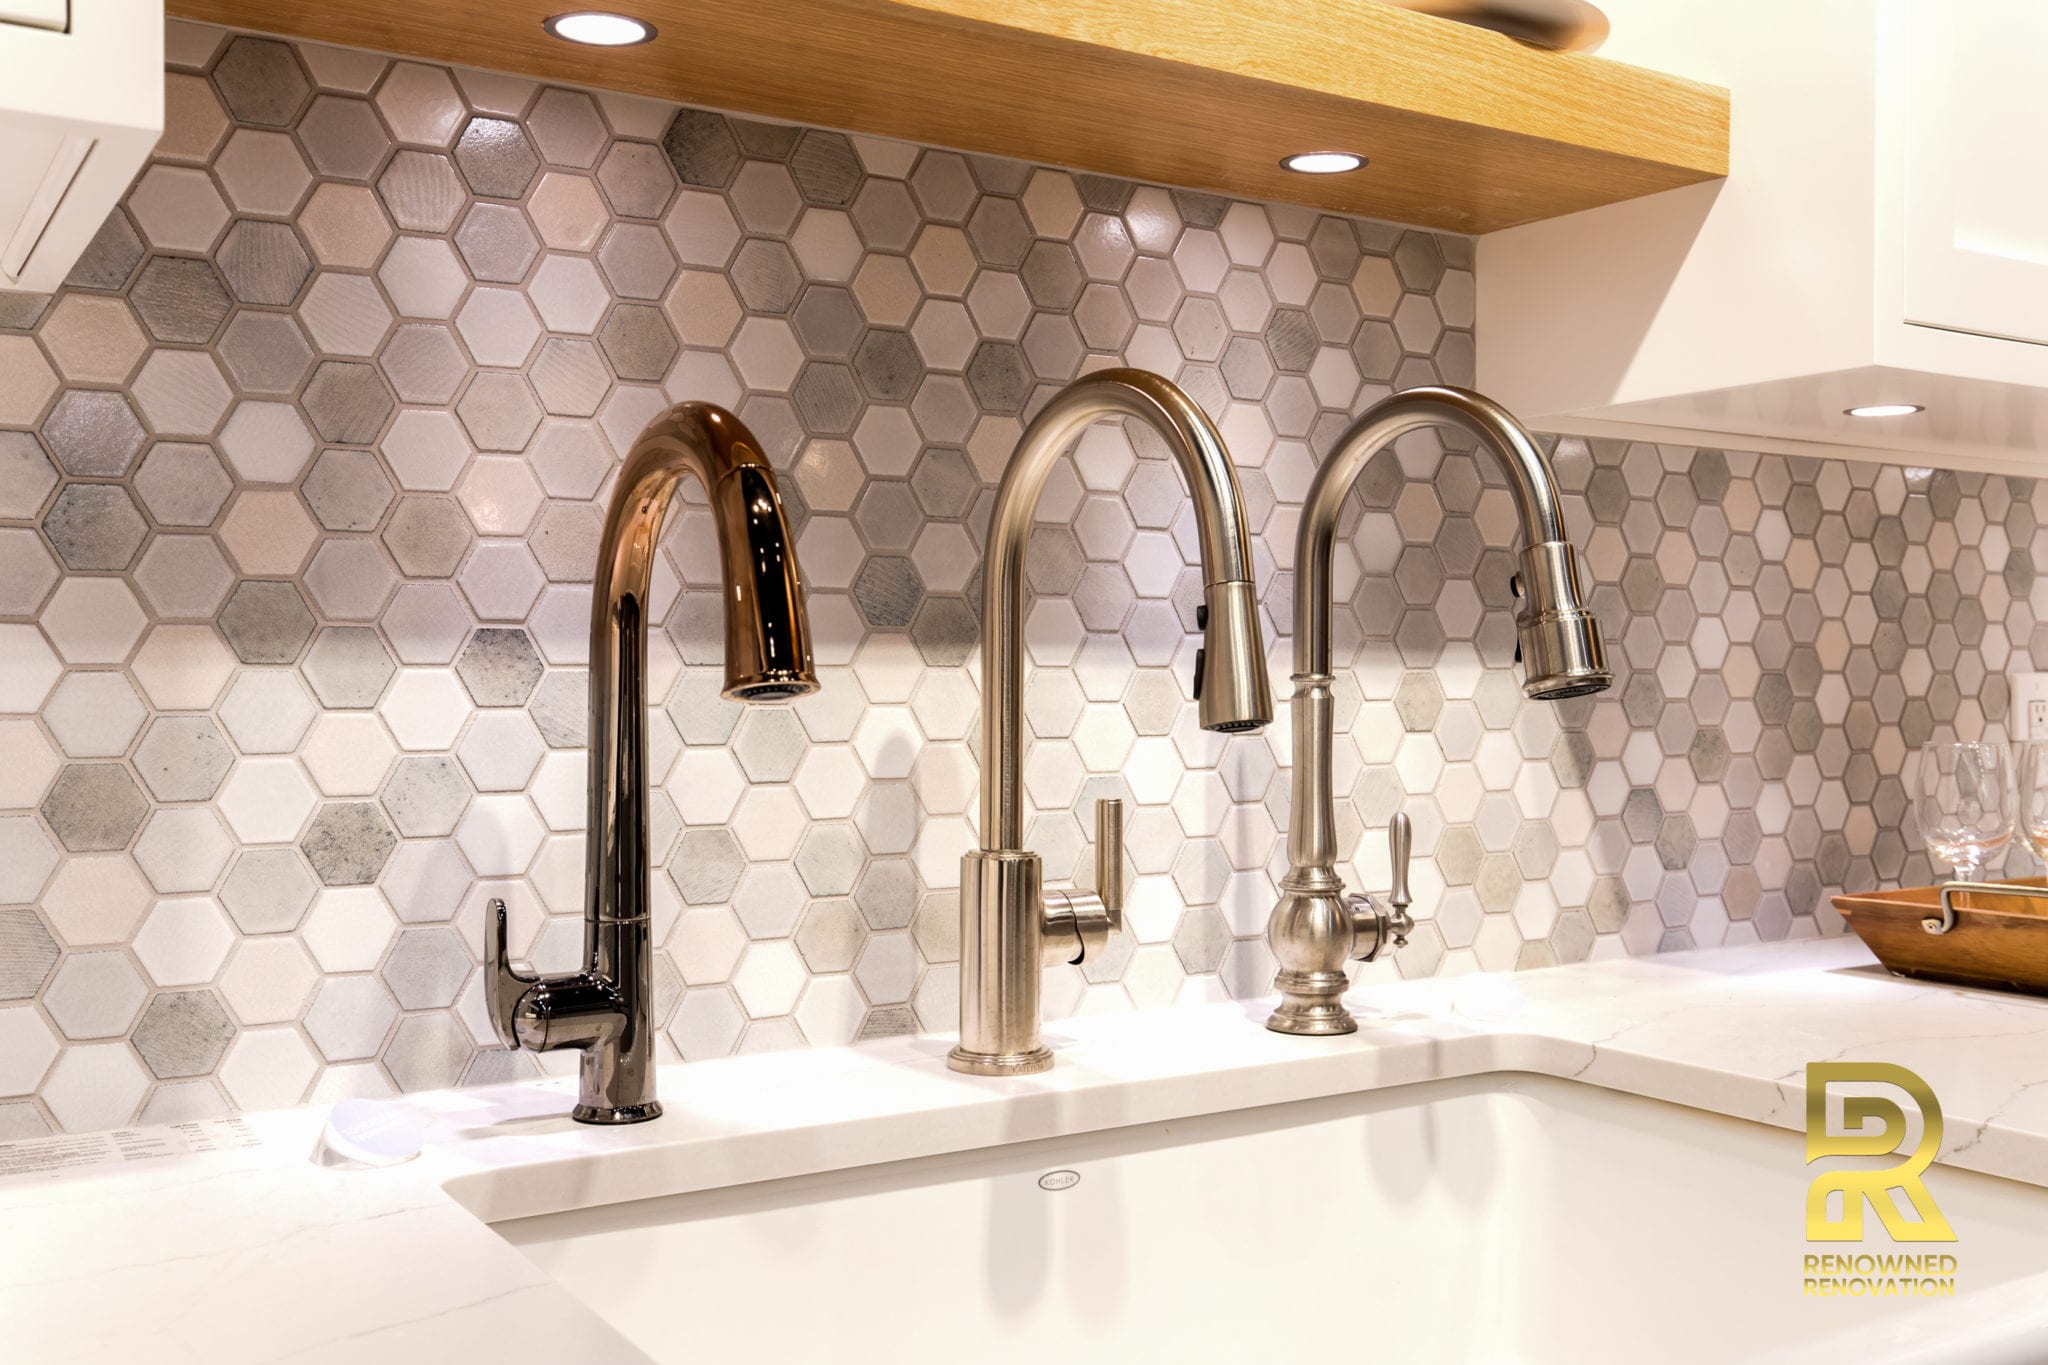 Kohler-Signature-Store-Dallas-StyleCraft-Cabinets-Designed-by-Renowned-Renovation1